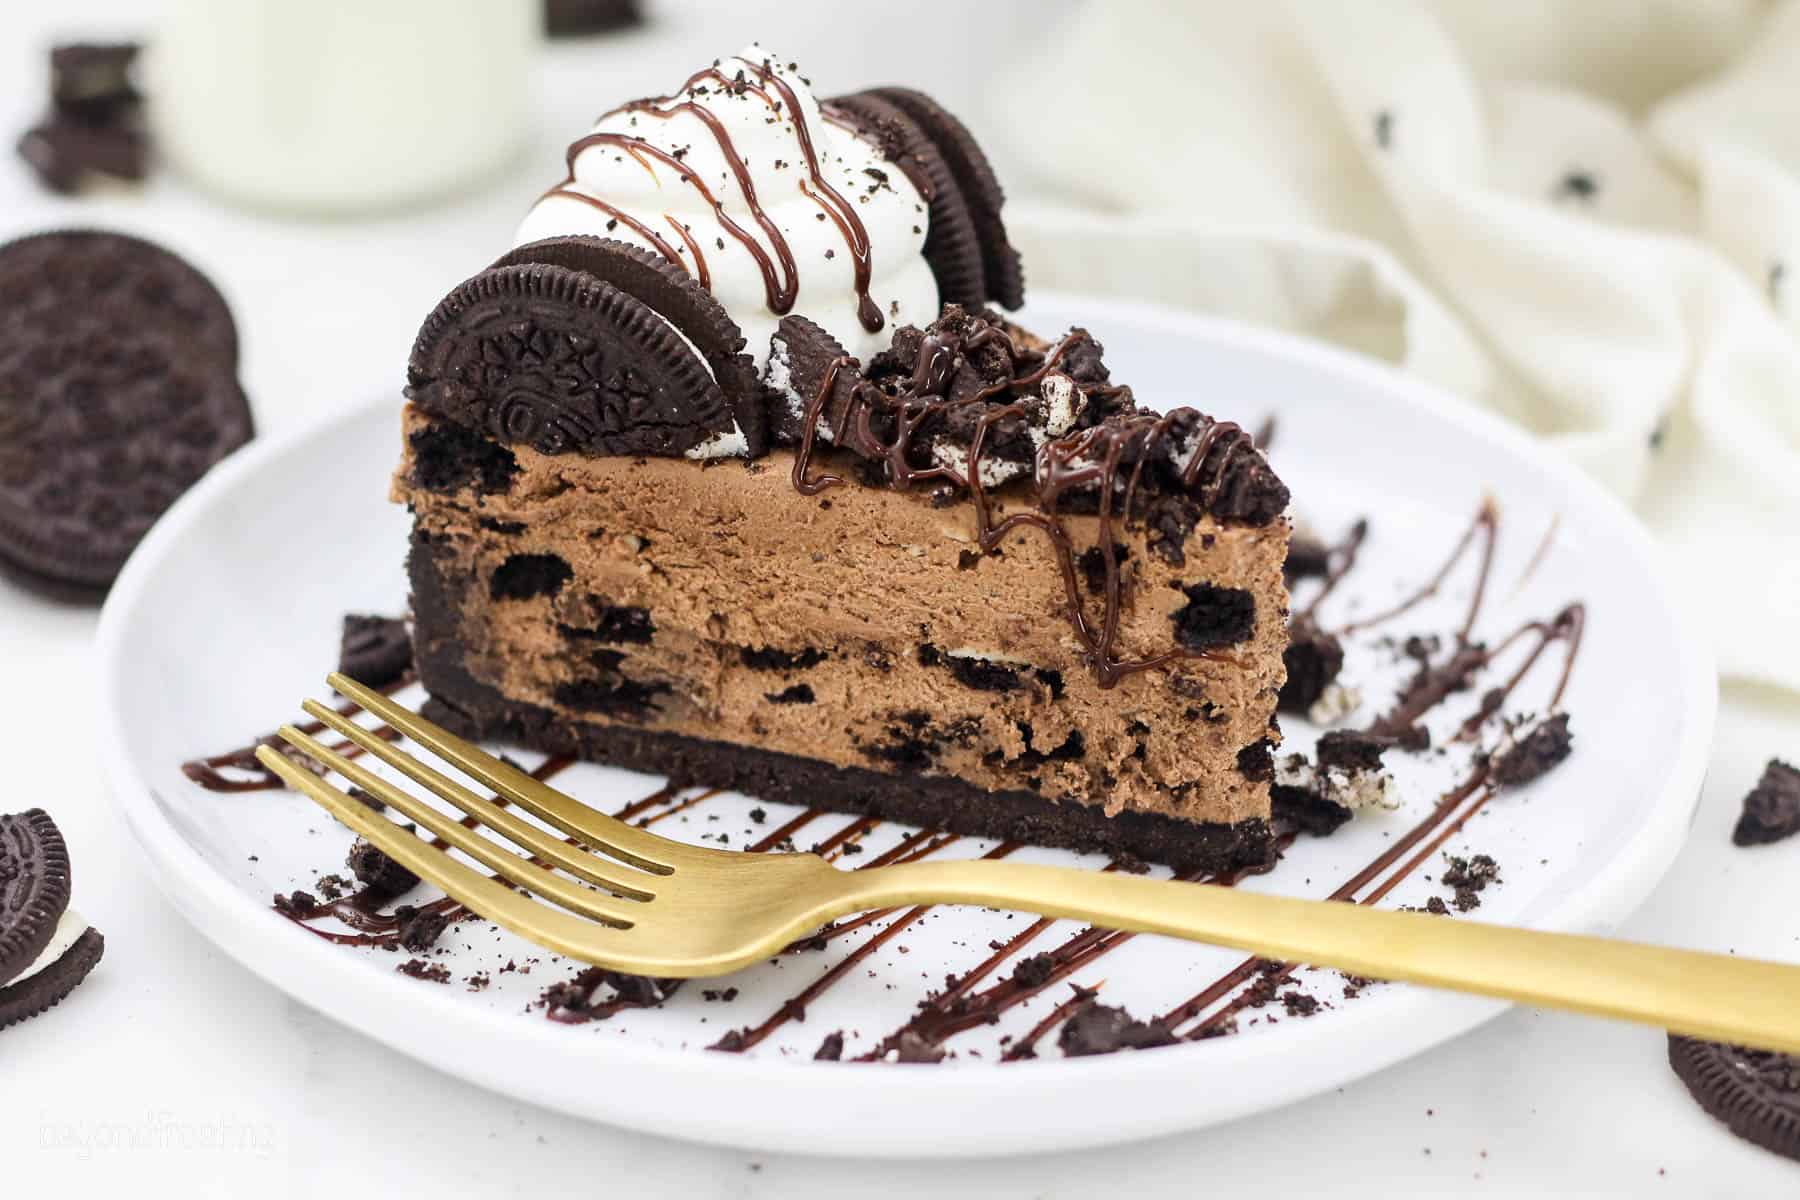 A plated slice of Chocolate Oreo Cheesecake garnish with whipped cream and crushed Oreos